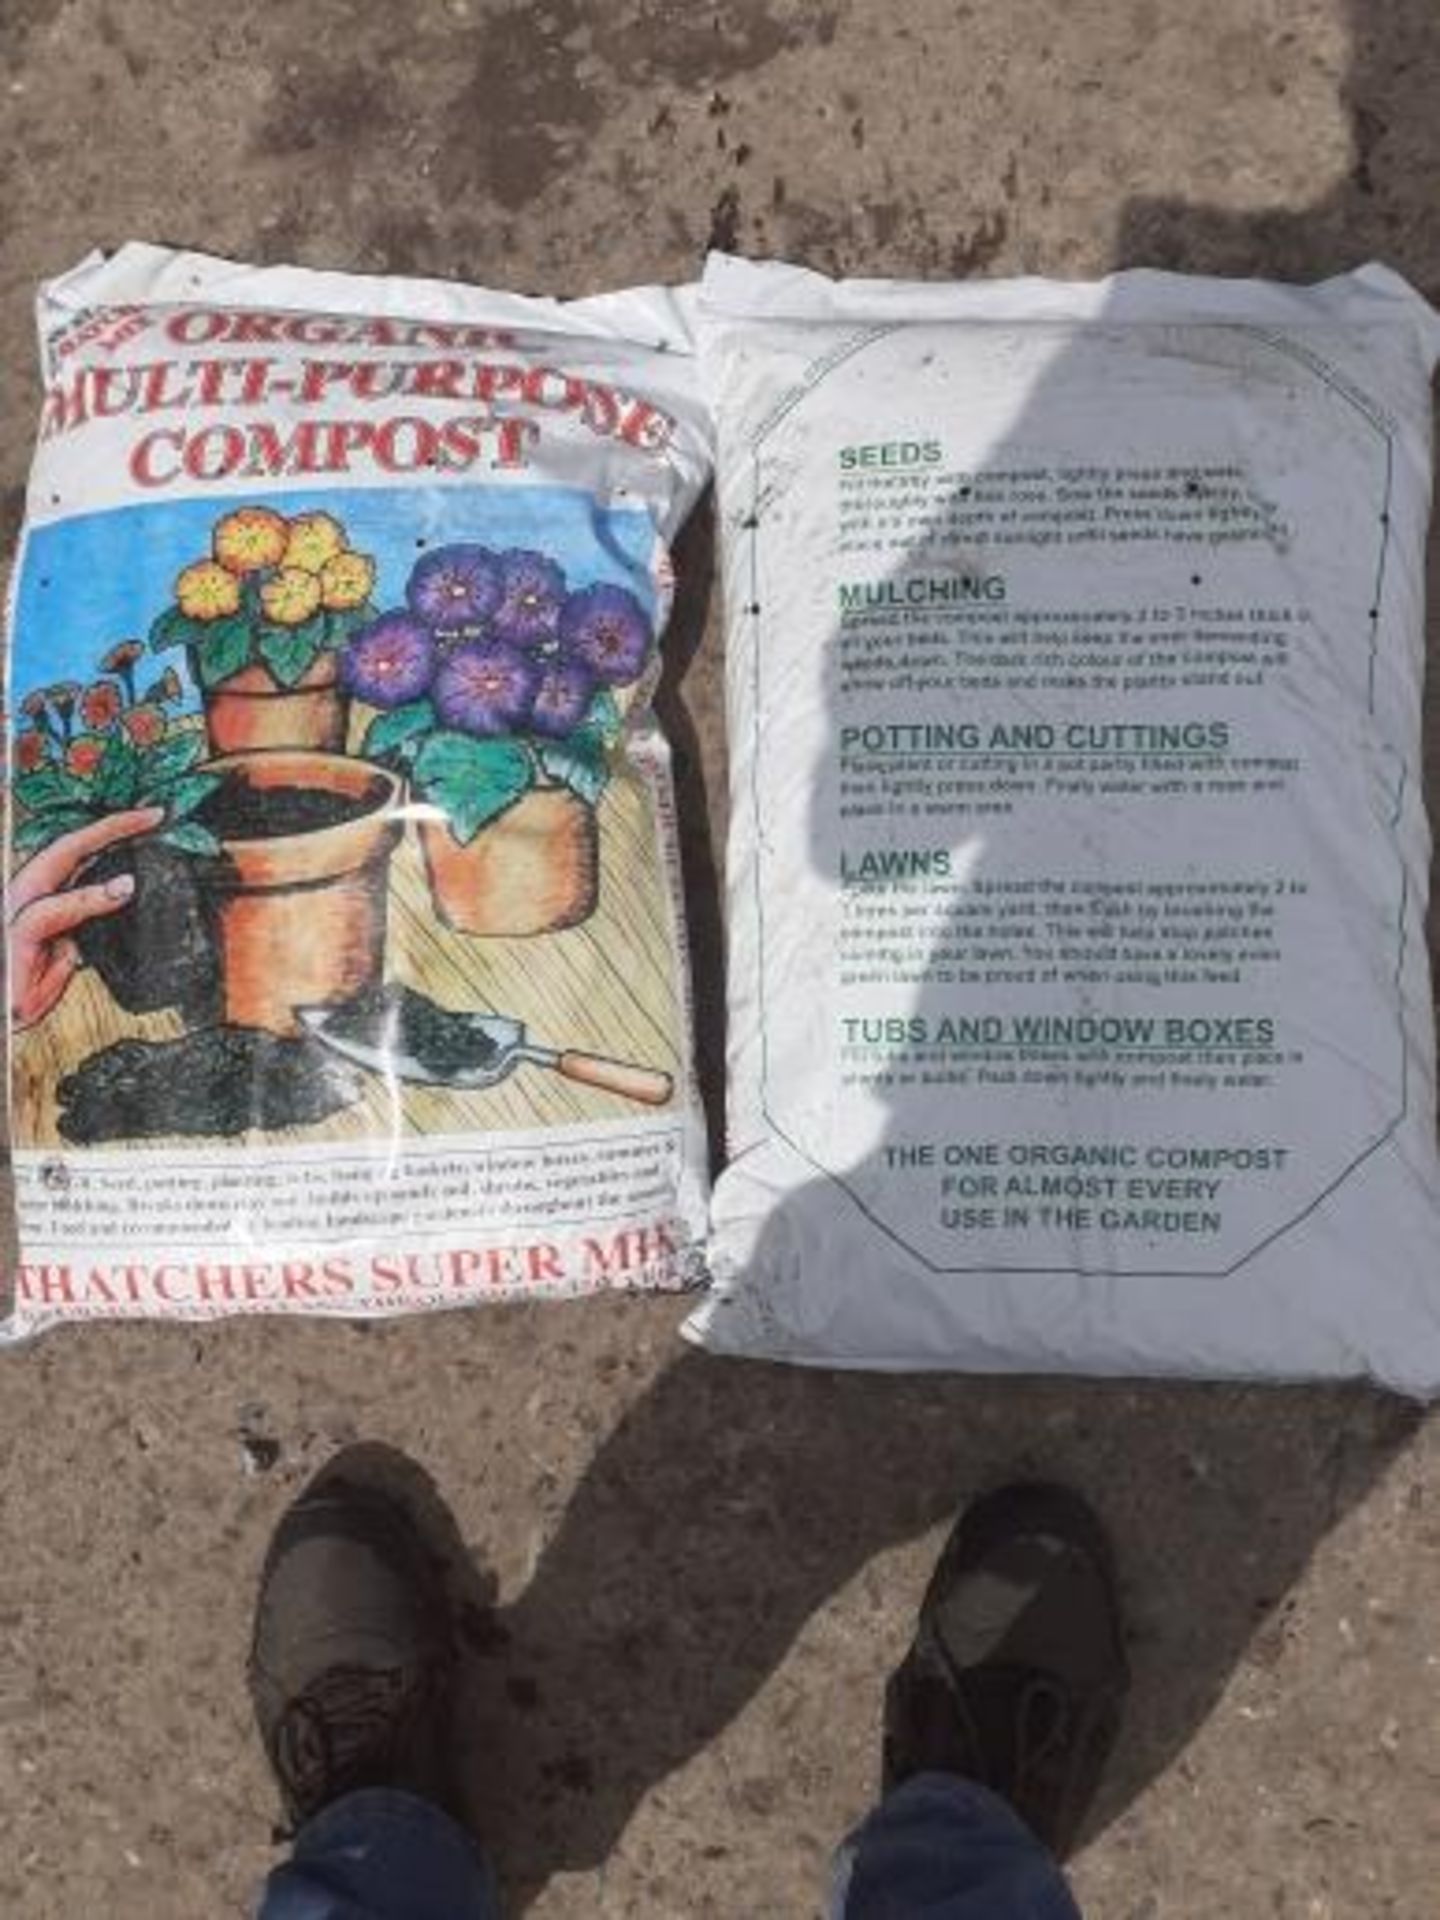 1 PALLET OF TOP GRADE COMPOST, EACH BAG CONTAINS 40 LITRES, 75 BAGS PER PALLET, APPROX WEIGHT 800kg - Image 4 of 4